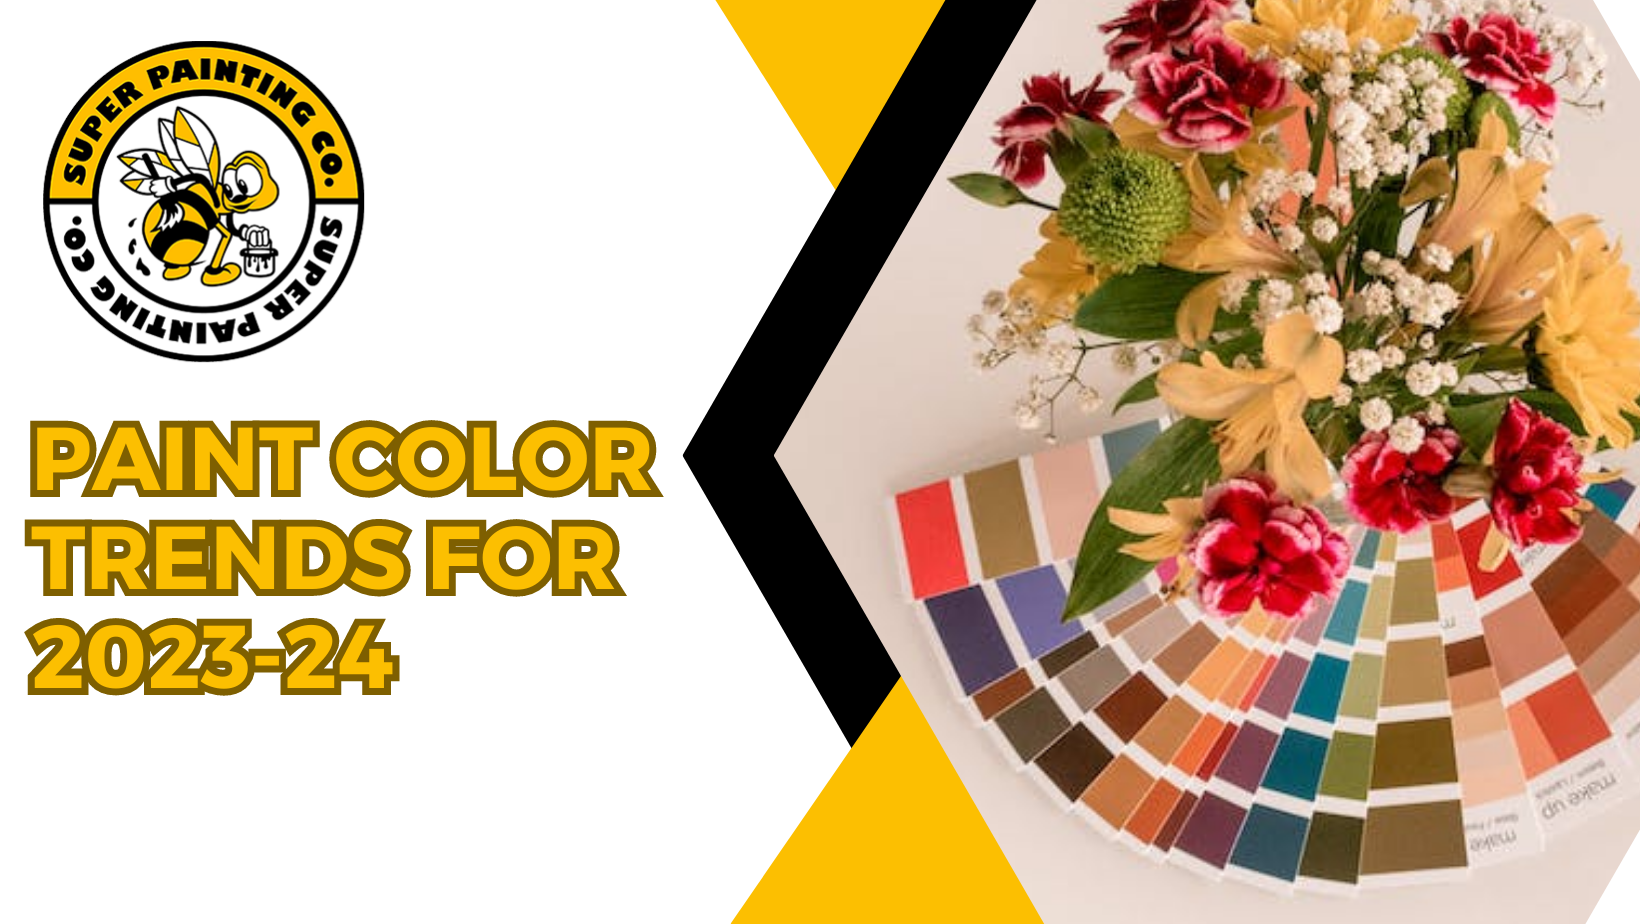 Paint Color Trends 202324 Coloring the Canvas from Nature's Palette to